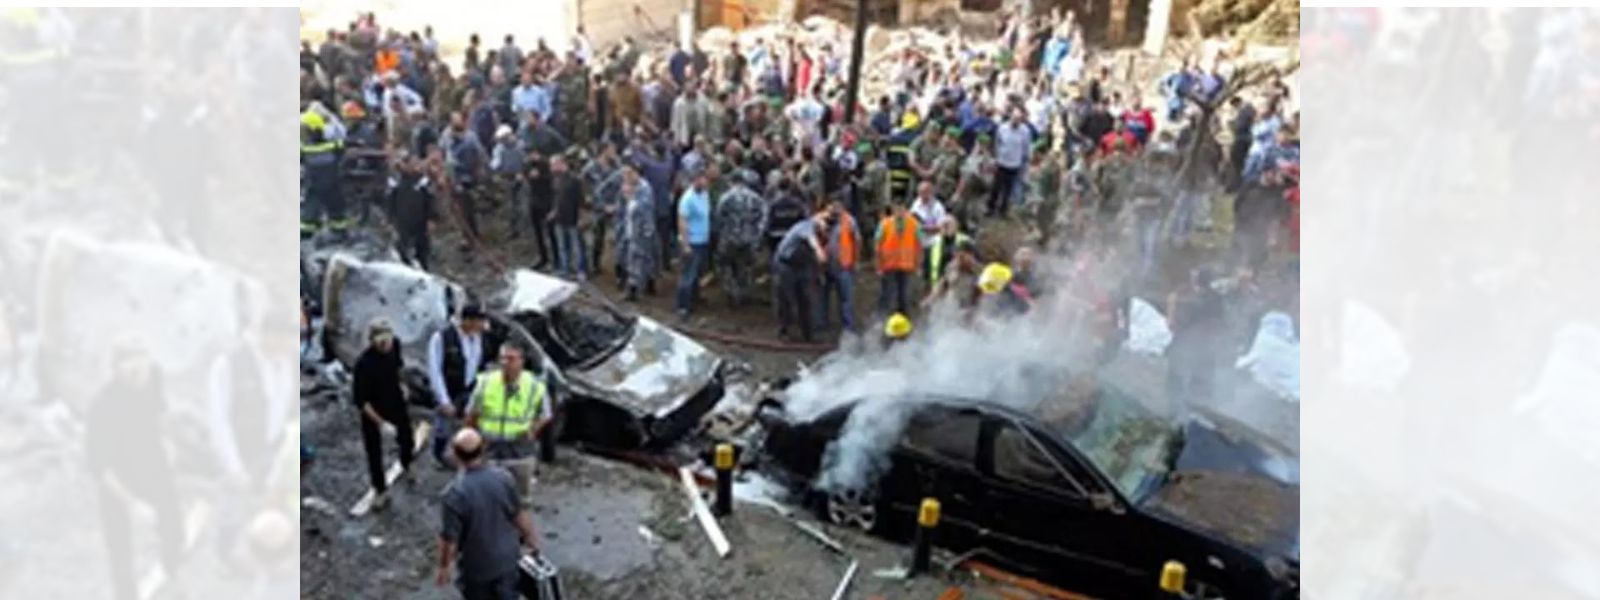 Chaos in the Middle East - Over 100 killed in Iran